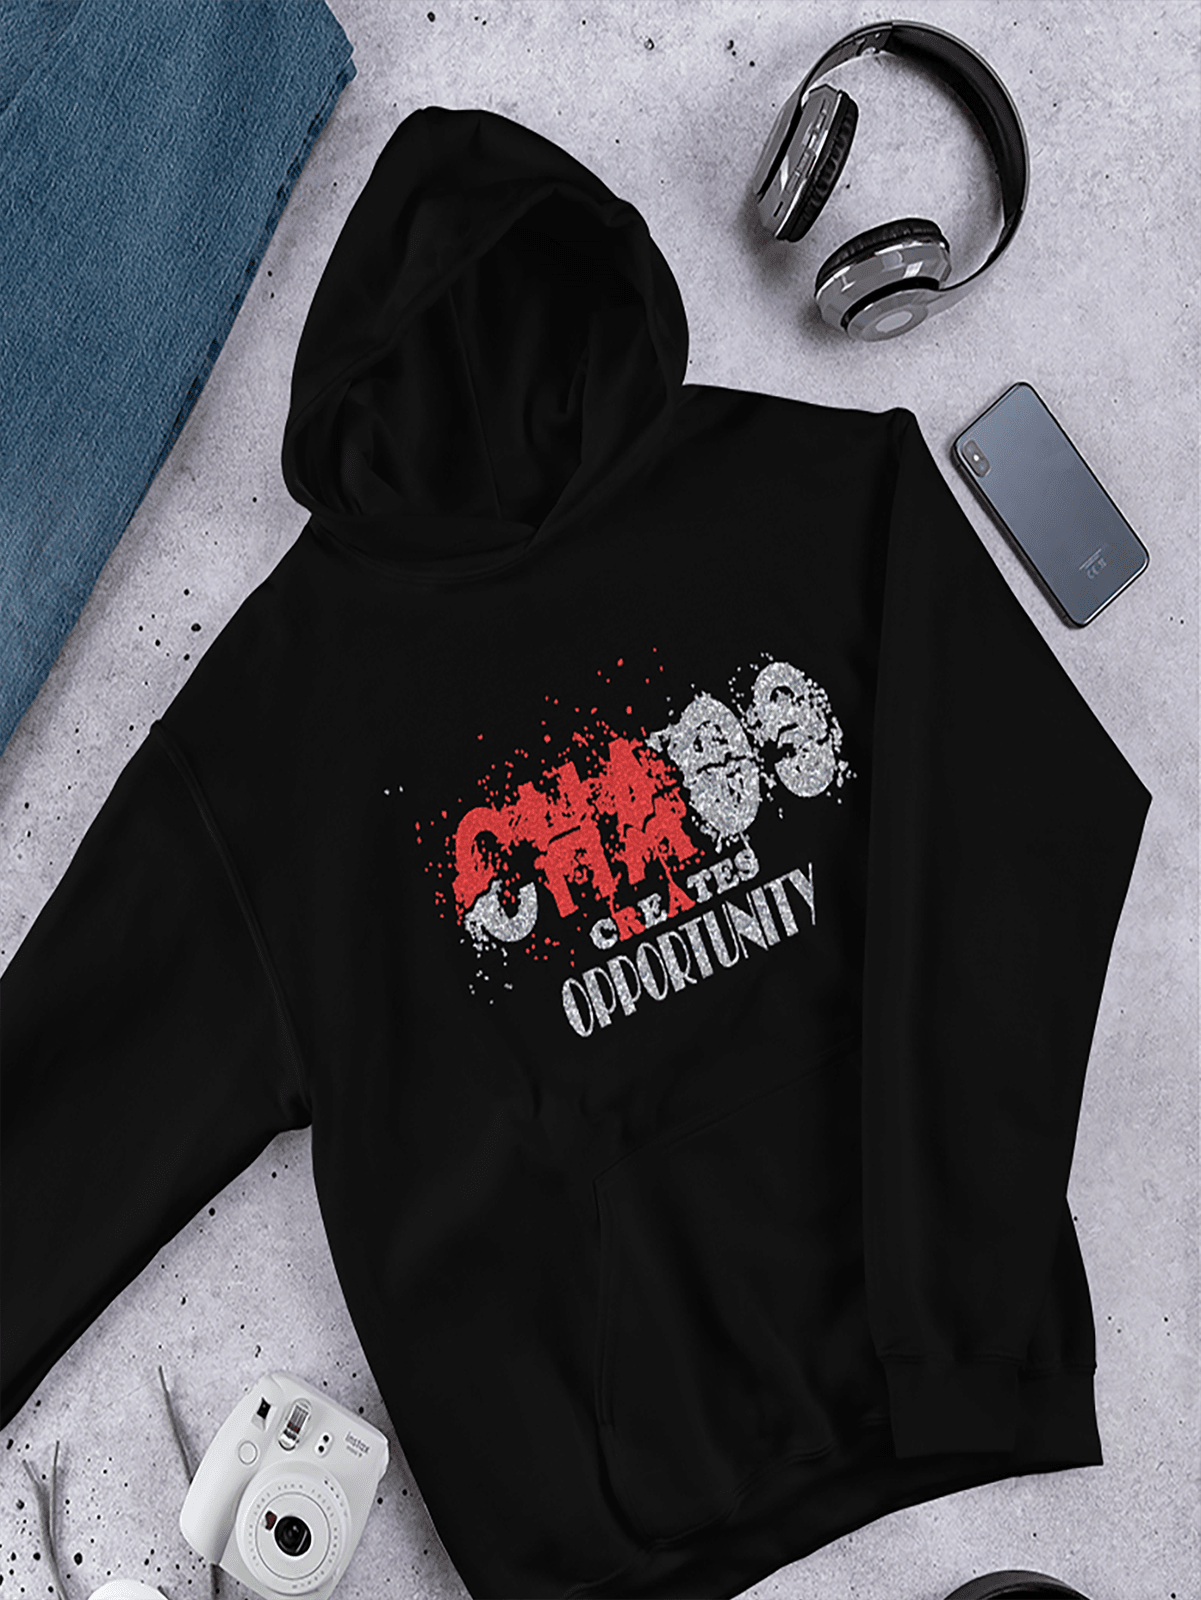 Chaos Creates Opportunity - Hoodie